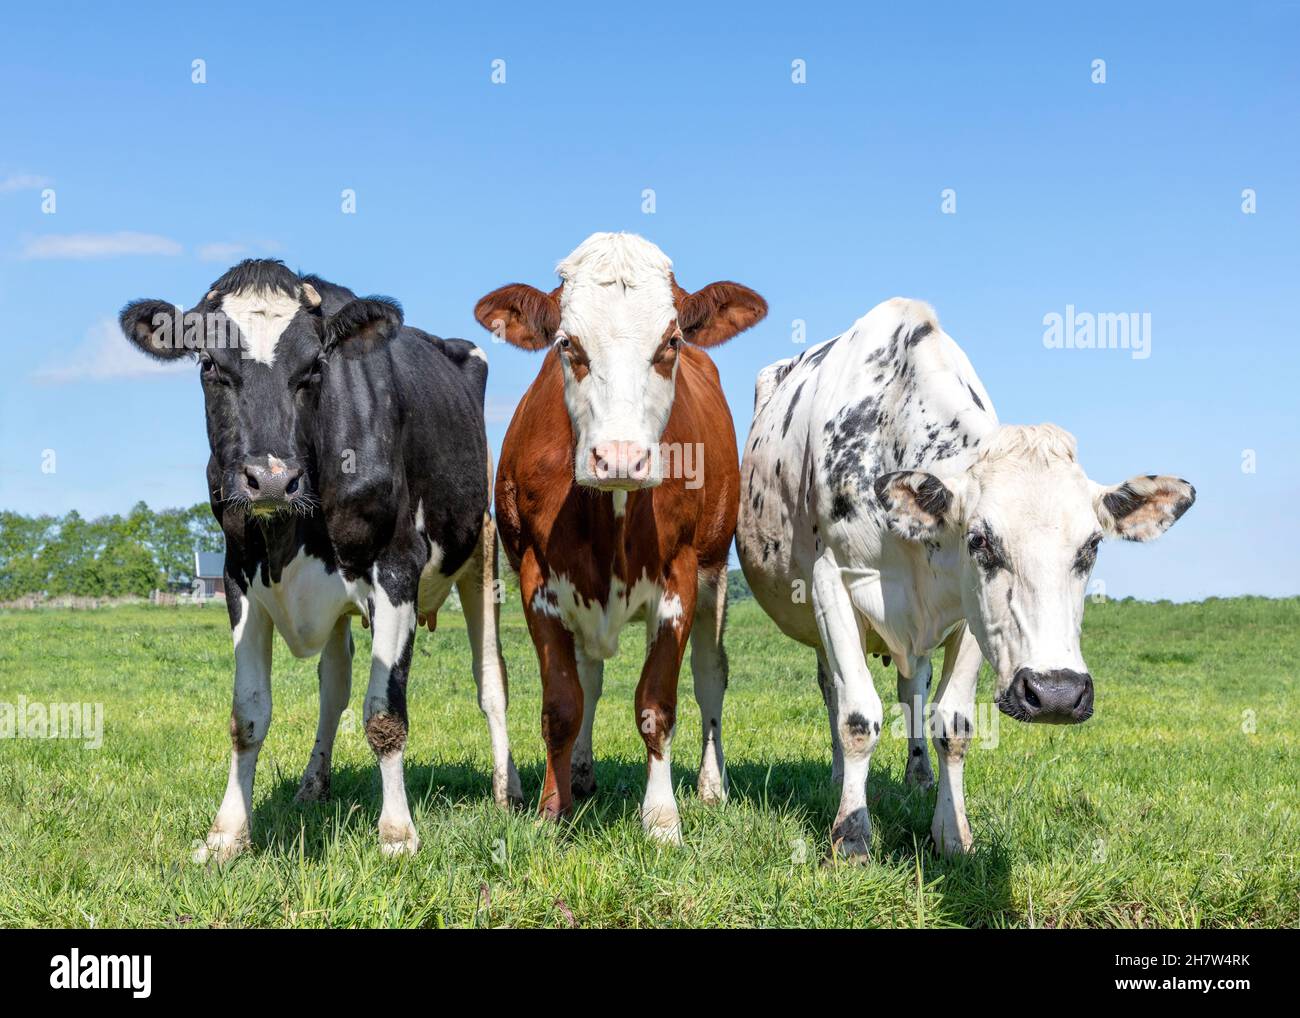 Three cows black red and white, together upright in a row side by side in a field, looking curious and a bit silly, front view Stock Photo